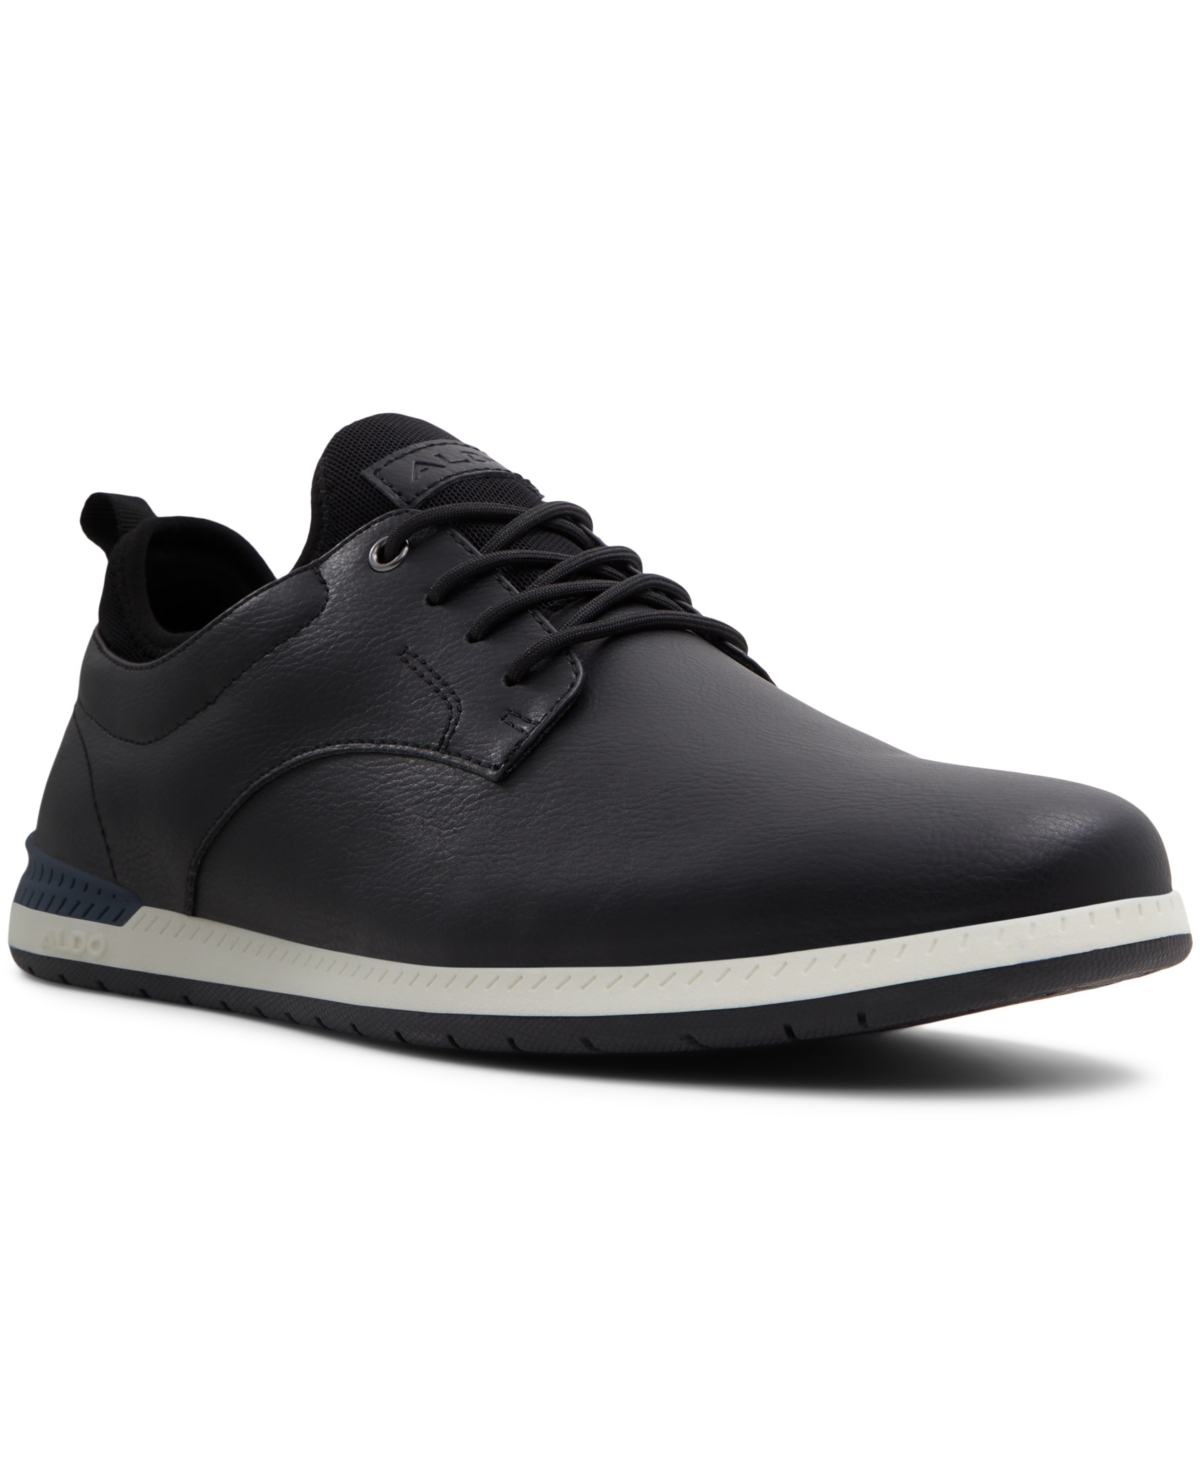 Men's Colby Casual Lace Up Shoes - Black